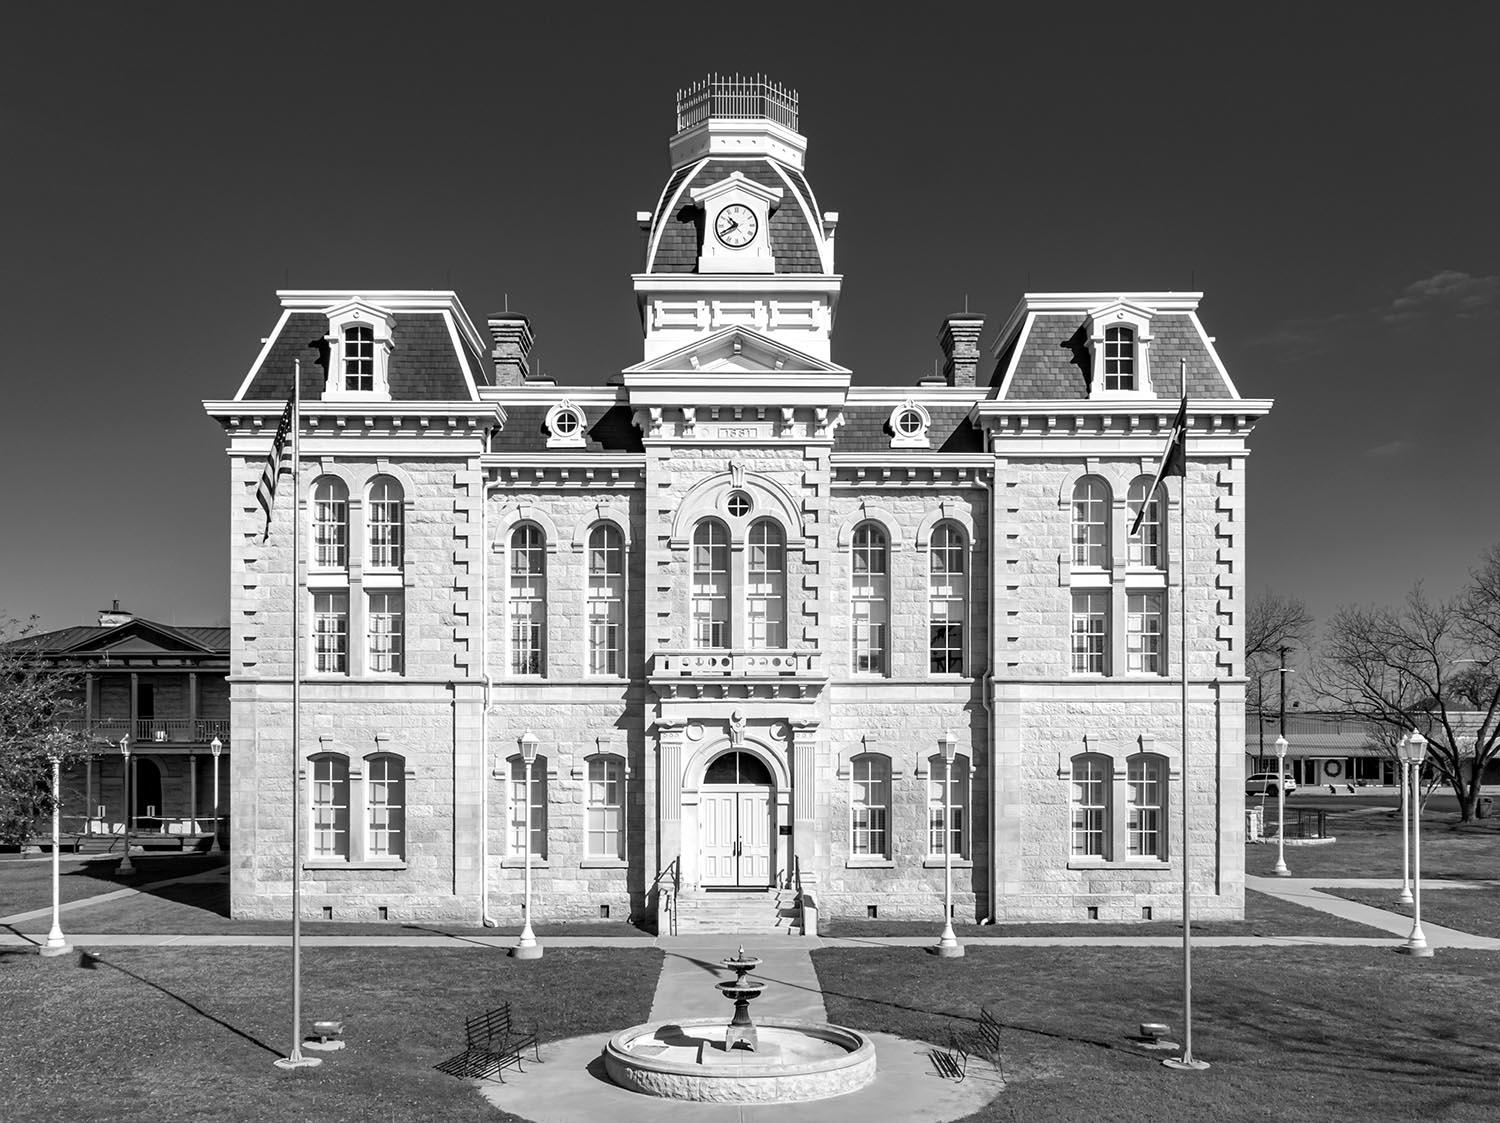 Robertson County Courthouse - 1881
Franklin, Texas